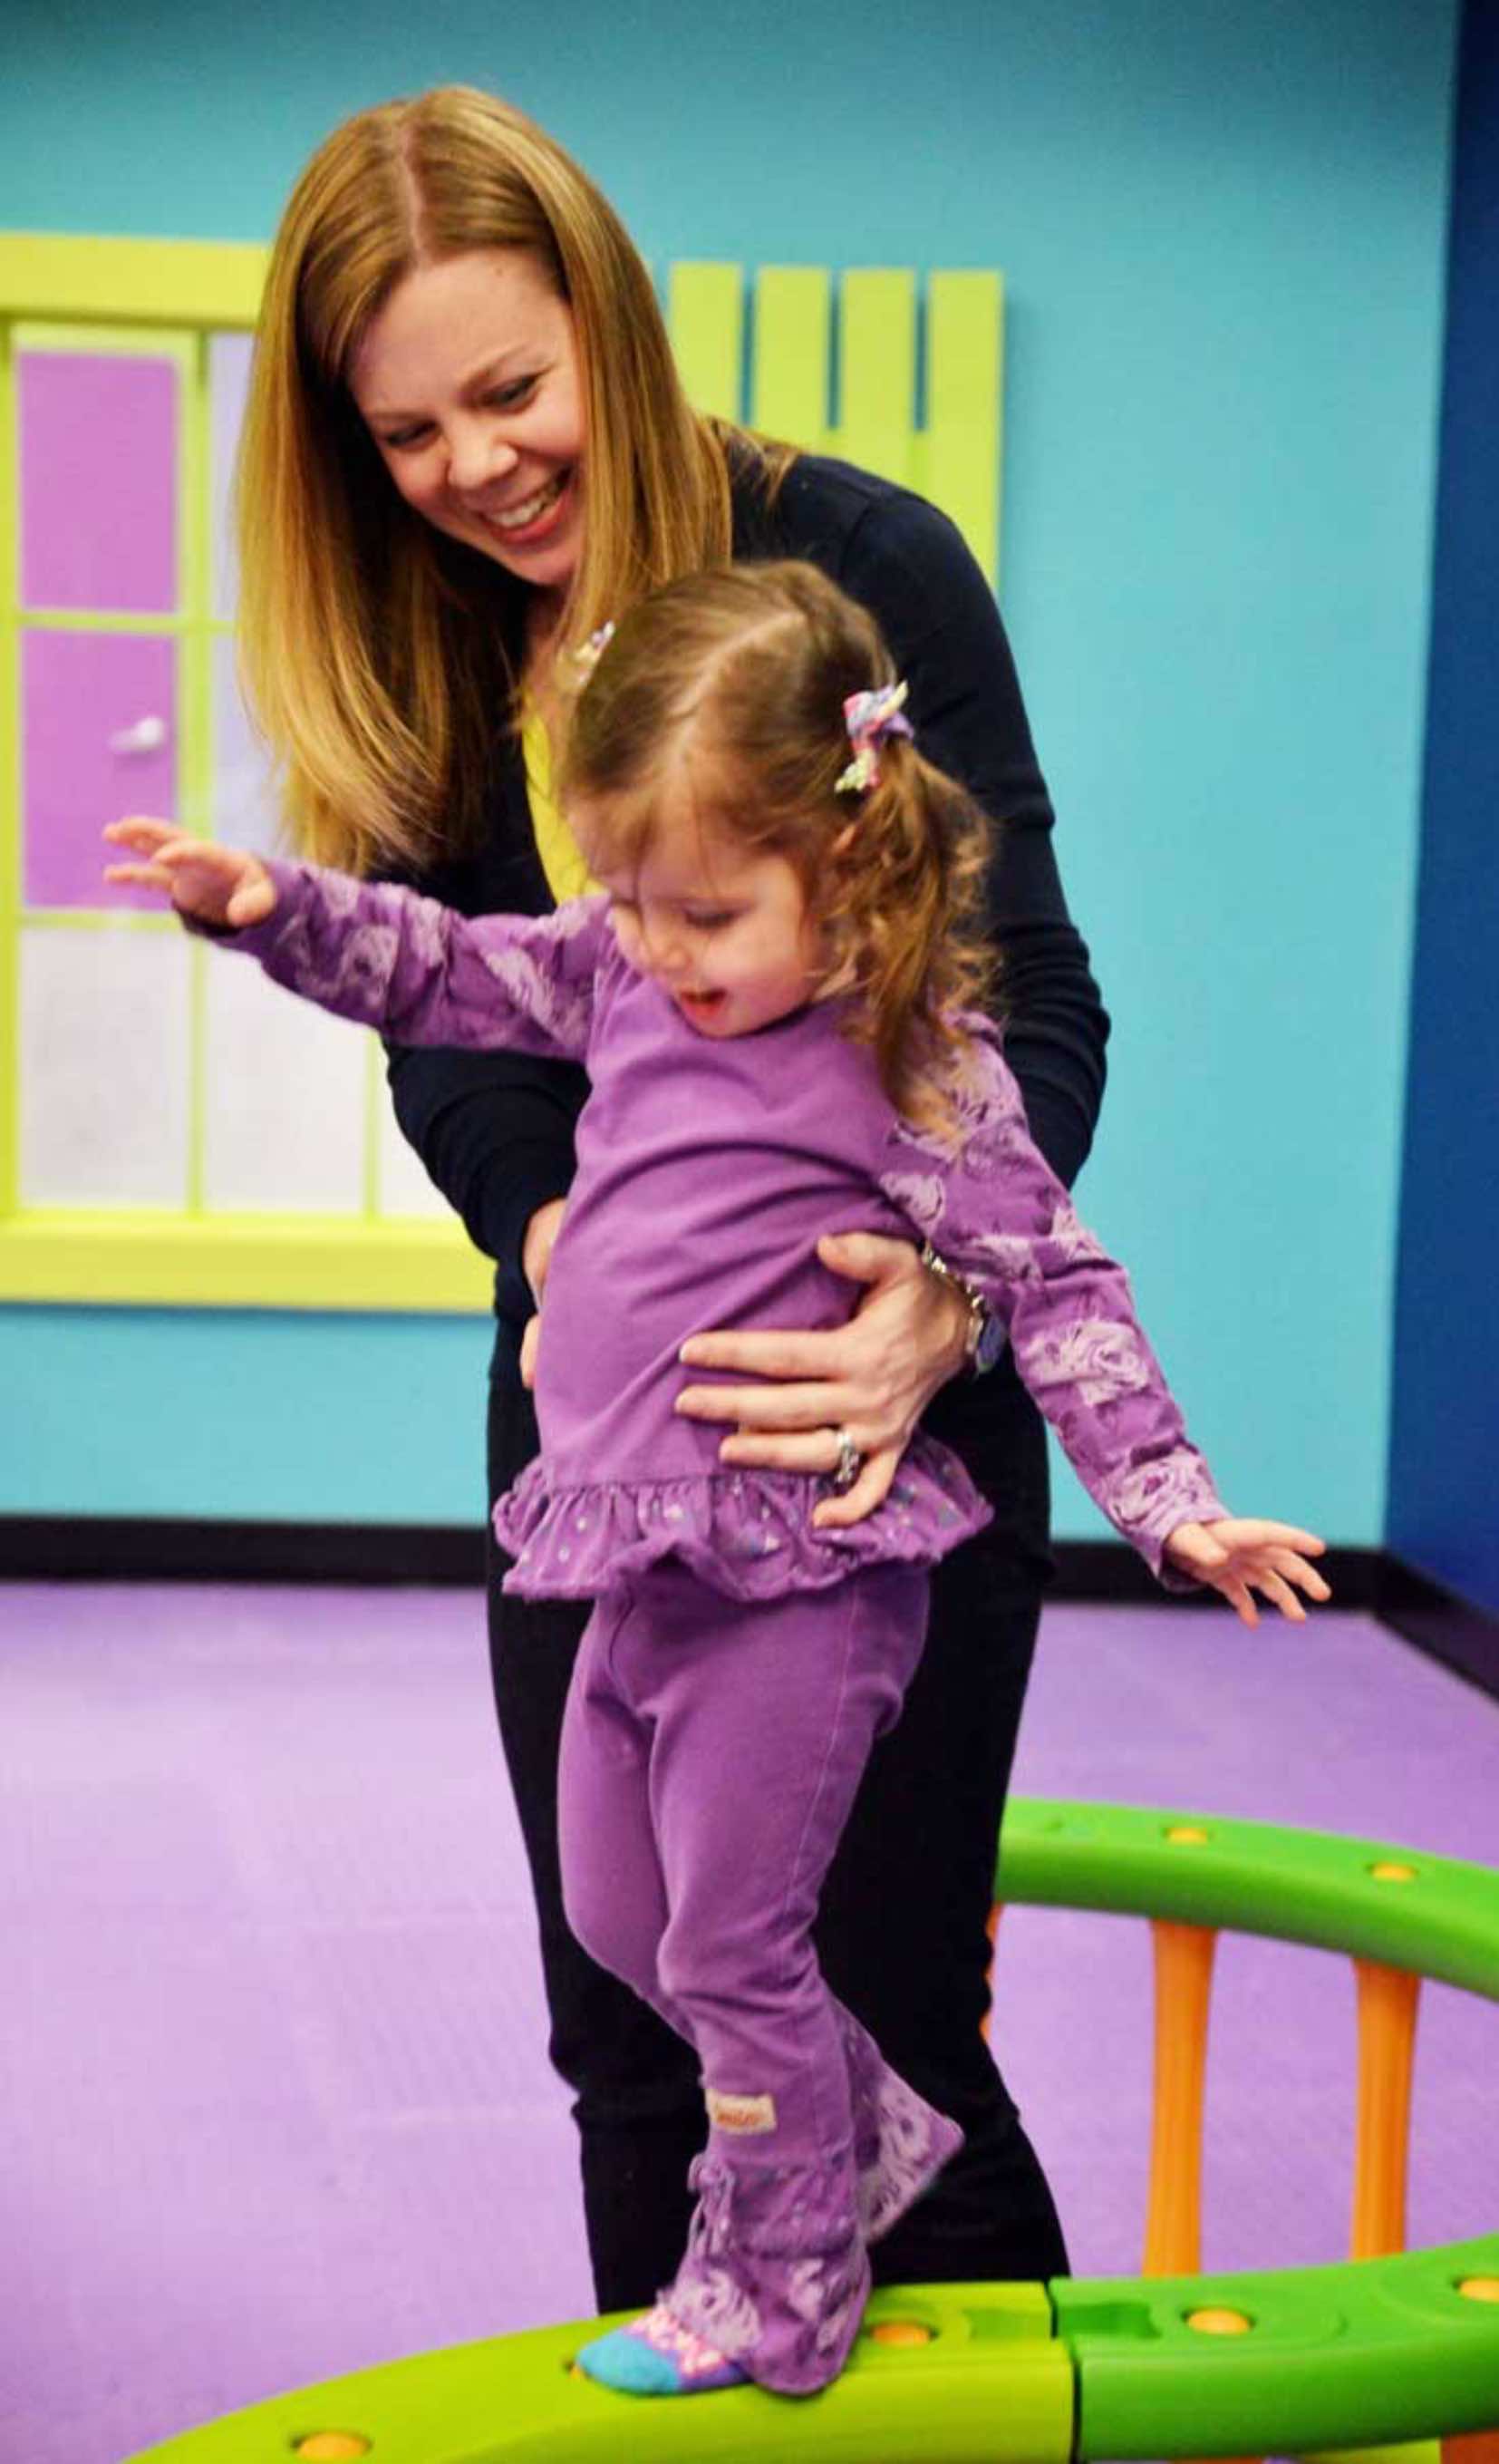 Kids and babies love our skills classes for kids in Wethersfield.